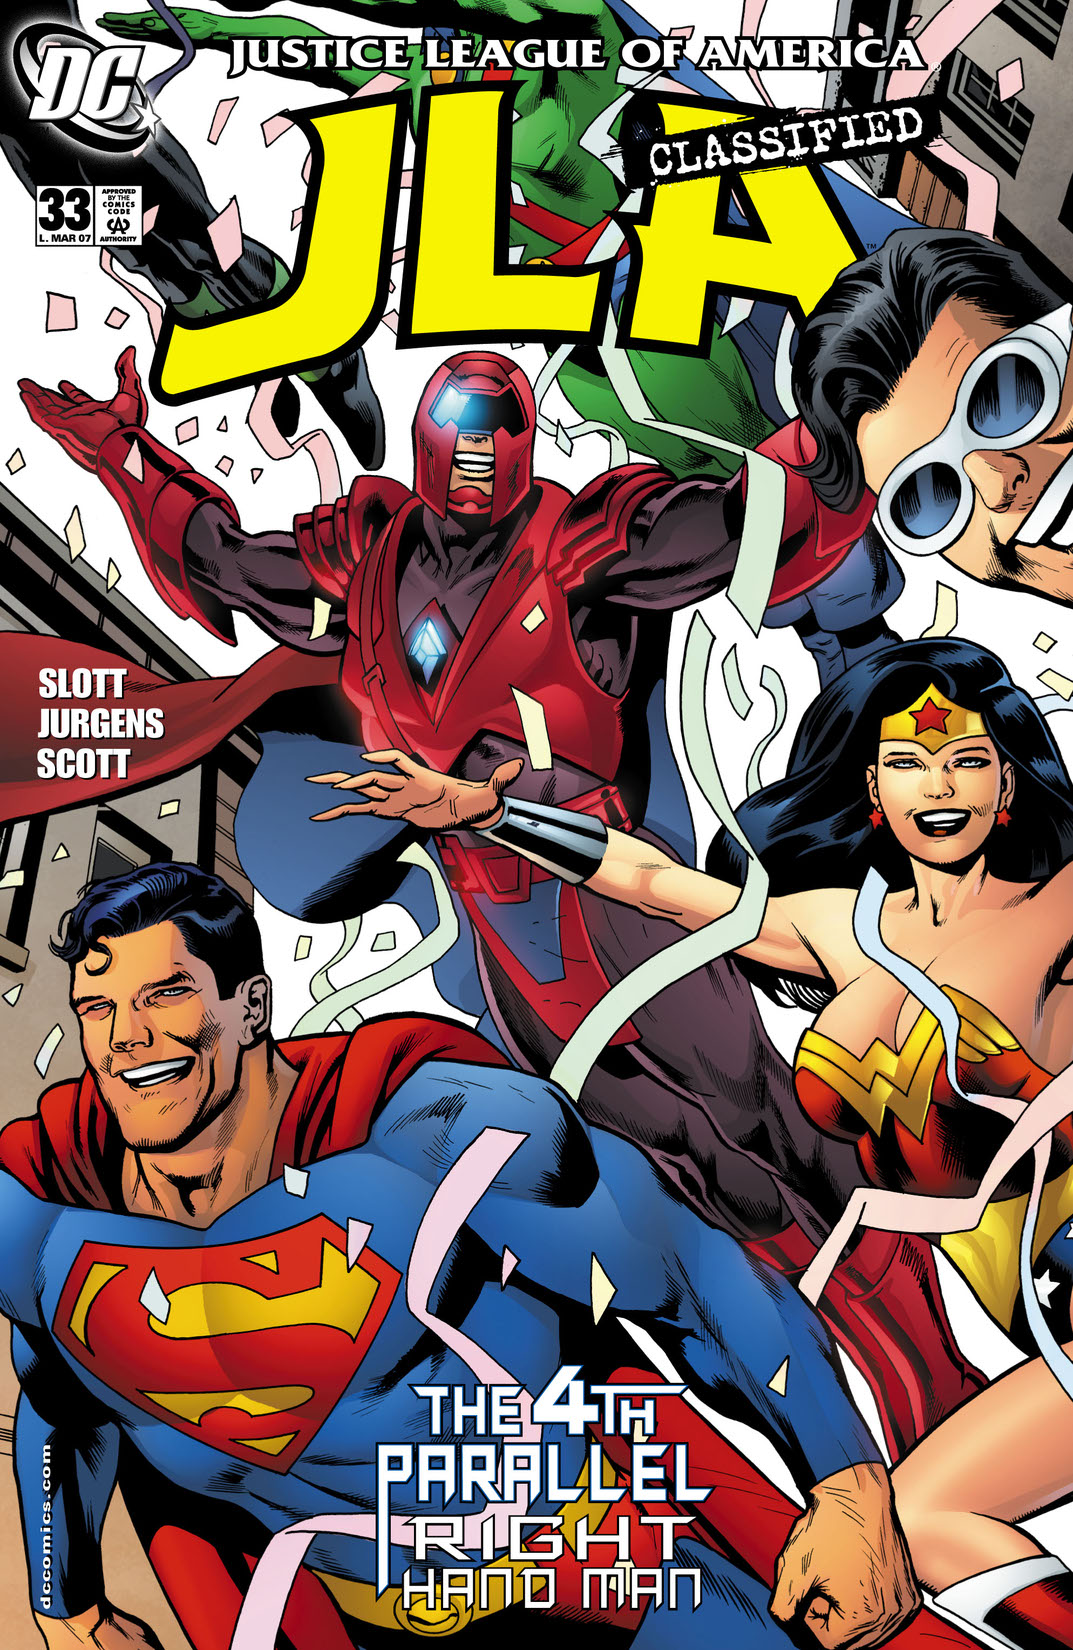 JLA: Classified #33 preview images